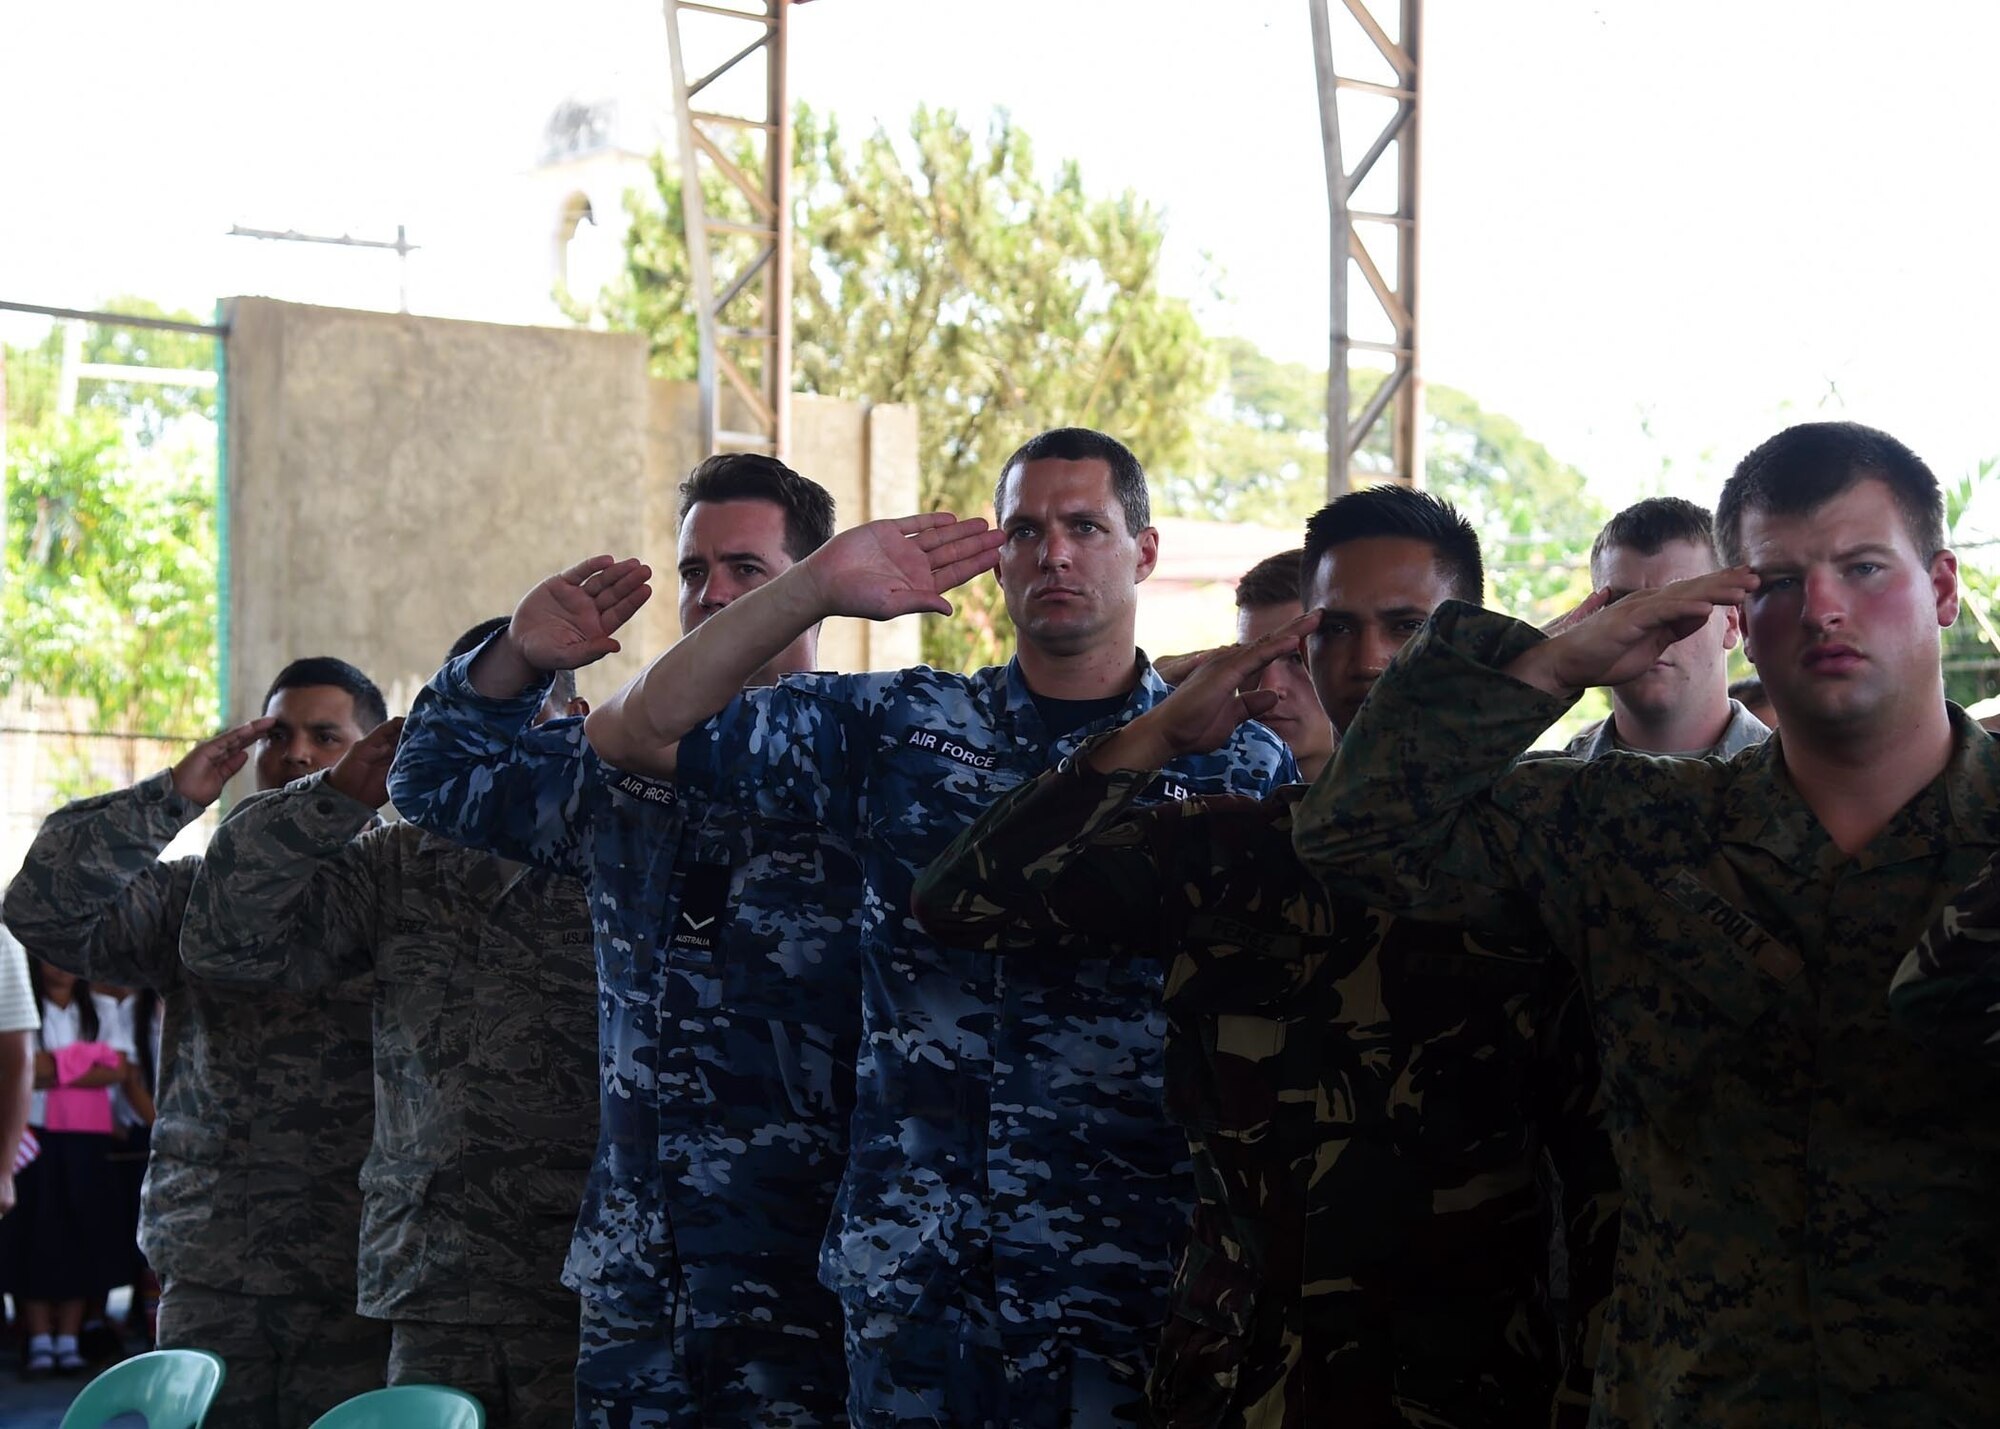 Members from the U.S. military, the Philippine Air Force and the Royal Australian Air Force salute as the Philippine national anthem is played during the Pacific Angel Philippine closing ceremony in Bohol Province, Philippines, Aug. 24, 2015. Over the course of six days, 5,101 patients received health care and six different schools were refurbished providing rehabilitated learning space to about 5,000 students. Pacific Angel is a multilateral humanitarian assistance civil military operation, which improves military-to-military partnerships in the Pacific while also providing medical health outreach, civic engineering projects and subject matter exchanges among partner forces.(U.S. Air Force photo by Tech. Sgt. Aaron Oelrich/Released)